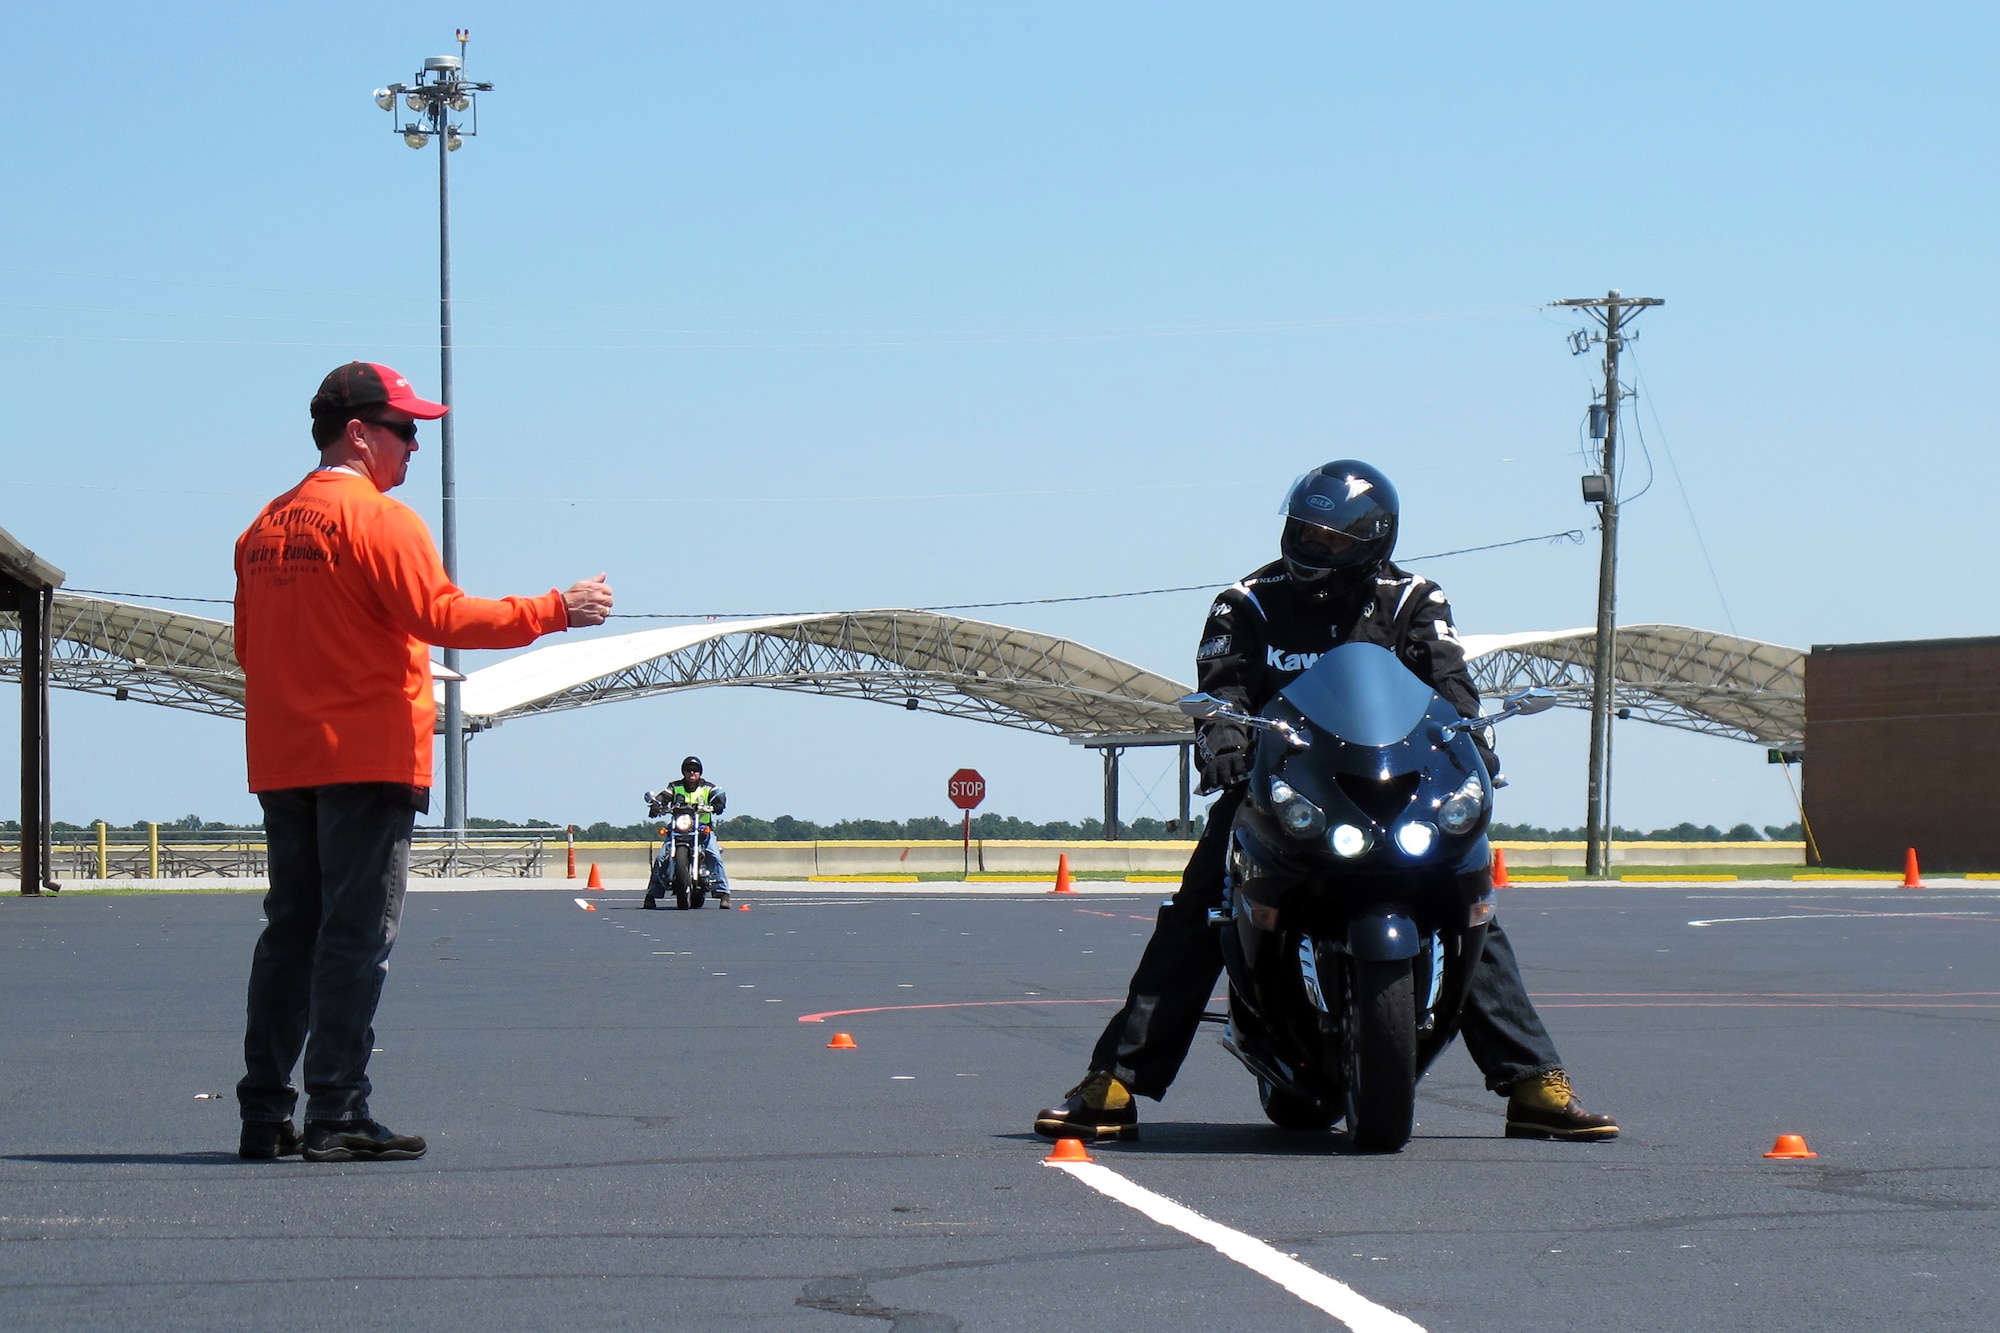 U.S. Air Force Maj. Wade Rivers and Master Sgt. Gene Croft conducted motorcycle safety training 25-26 Aug, 2012. Carolina Honda loaned two Honda motorcycles to McEntire Joint National Guard Base, S.C., to use in the Motorcycle Safety Foundation course at no cost to the base. 
(S.C. Air National Guard photo courtesy Zachary Rivers/RELEASED)